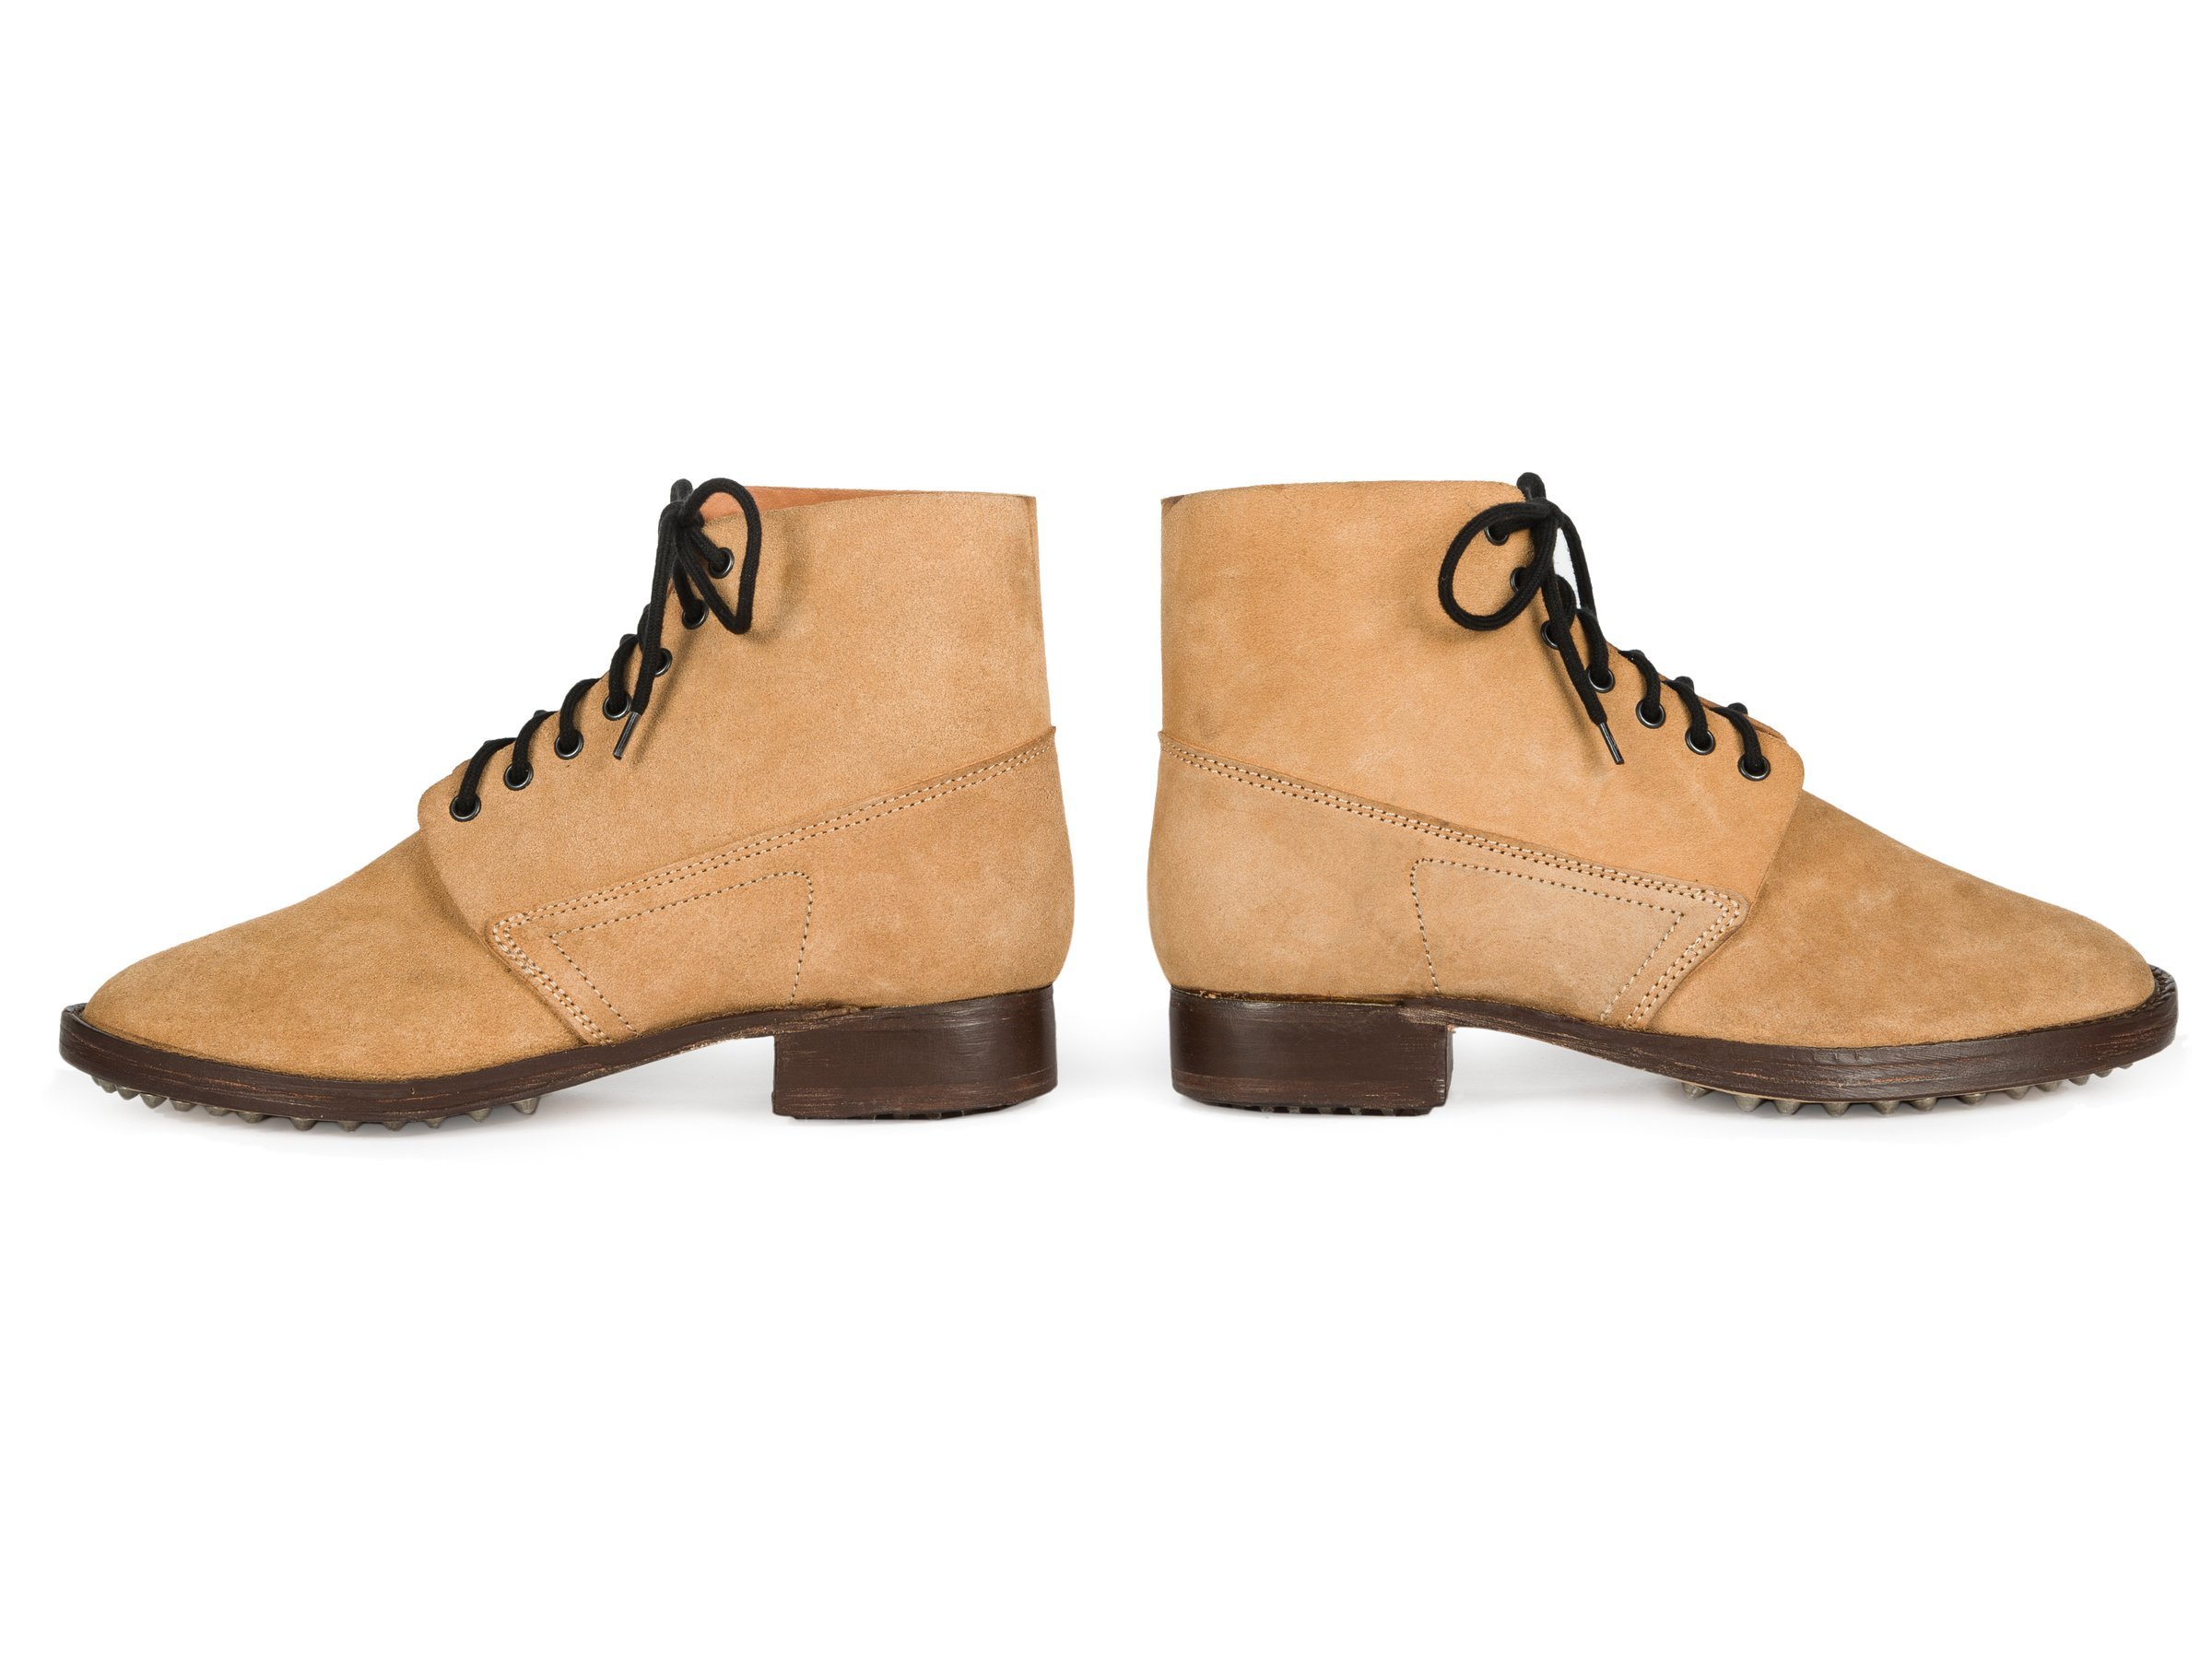 Brodequins Mle. 1912 - French Army ankle boots- brown - repro 45 146,25 € |  